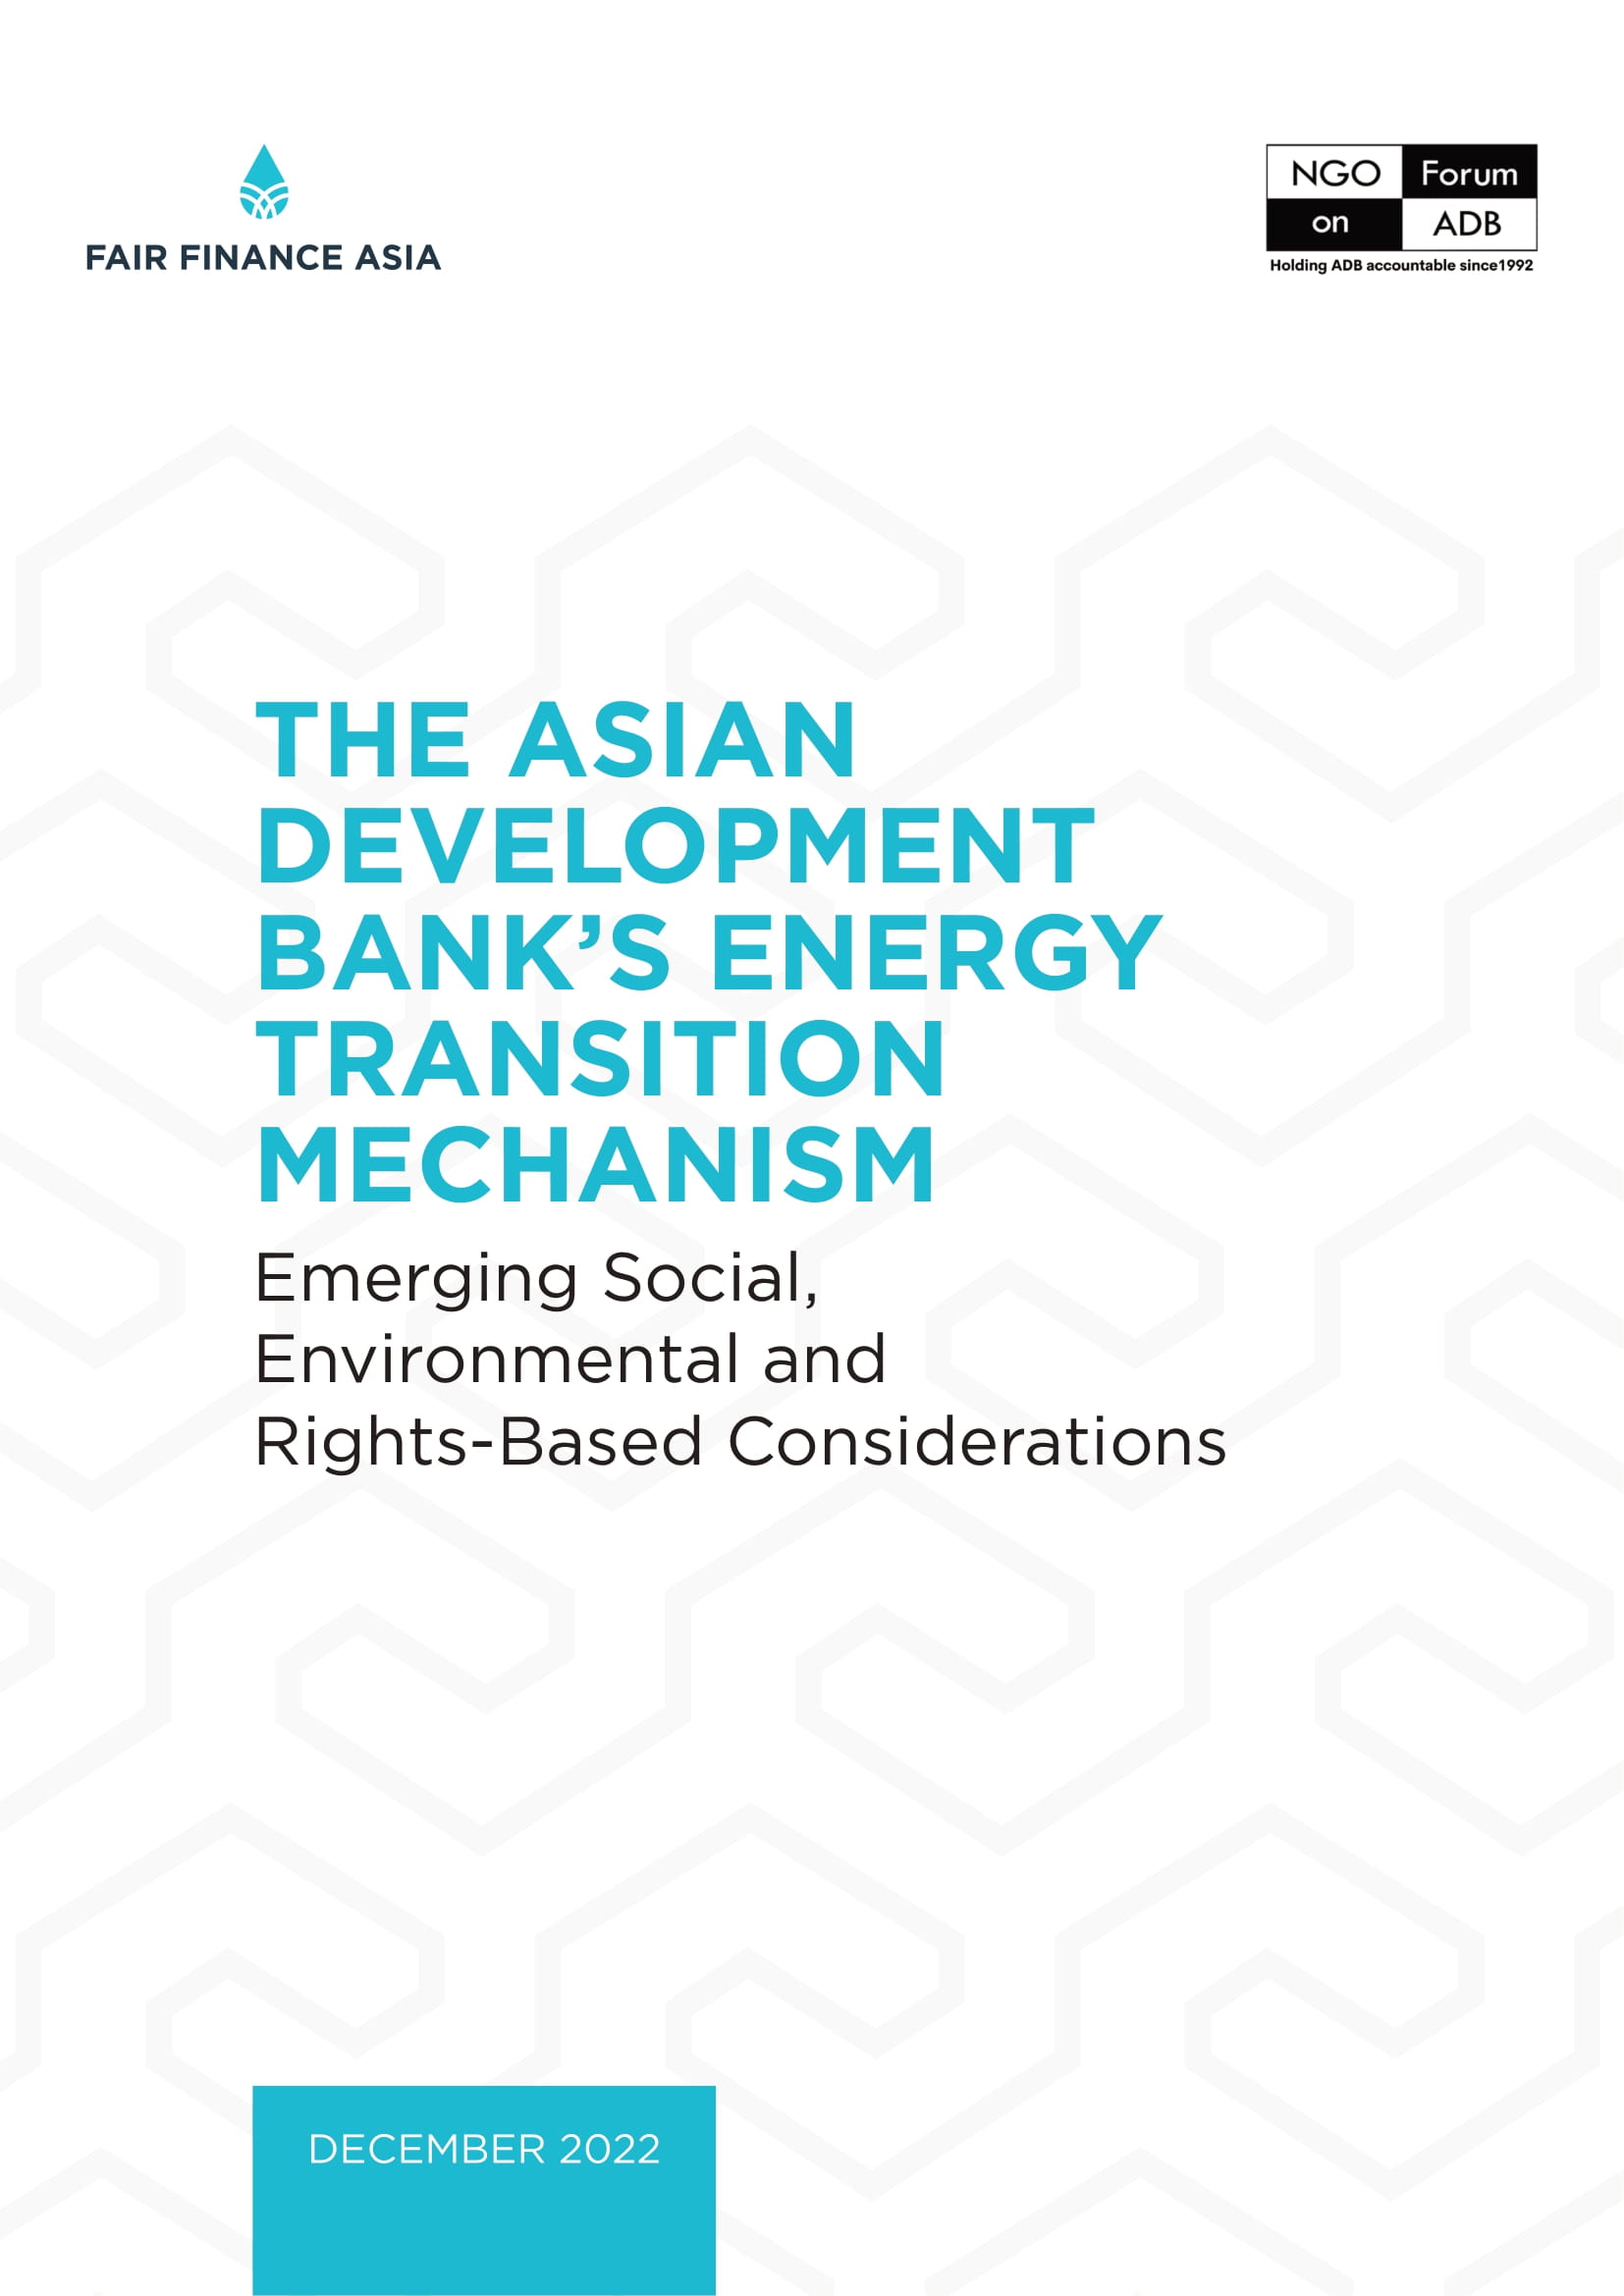 Press Release: Asian Civil Society Networks Raise Critical Questions and Concerns in New Report About the ADB’s Energy Transition Mechanism